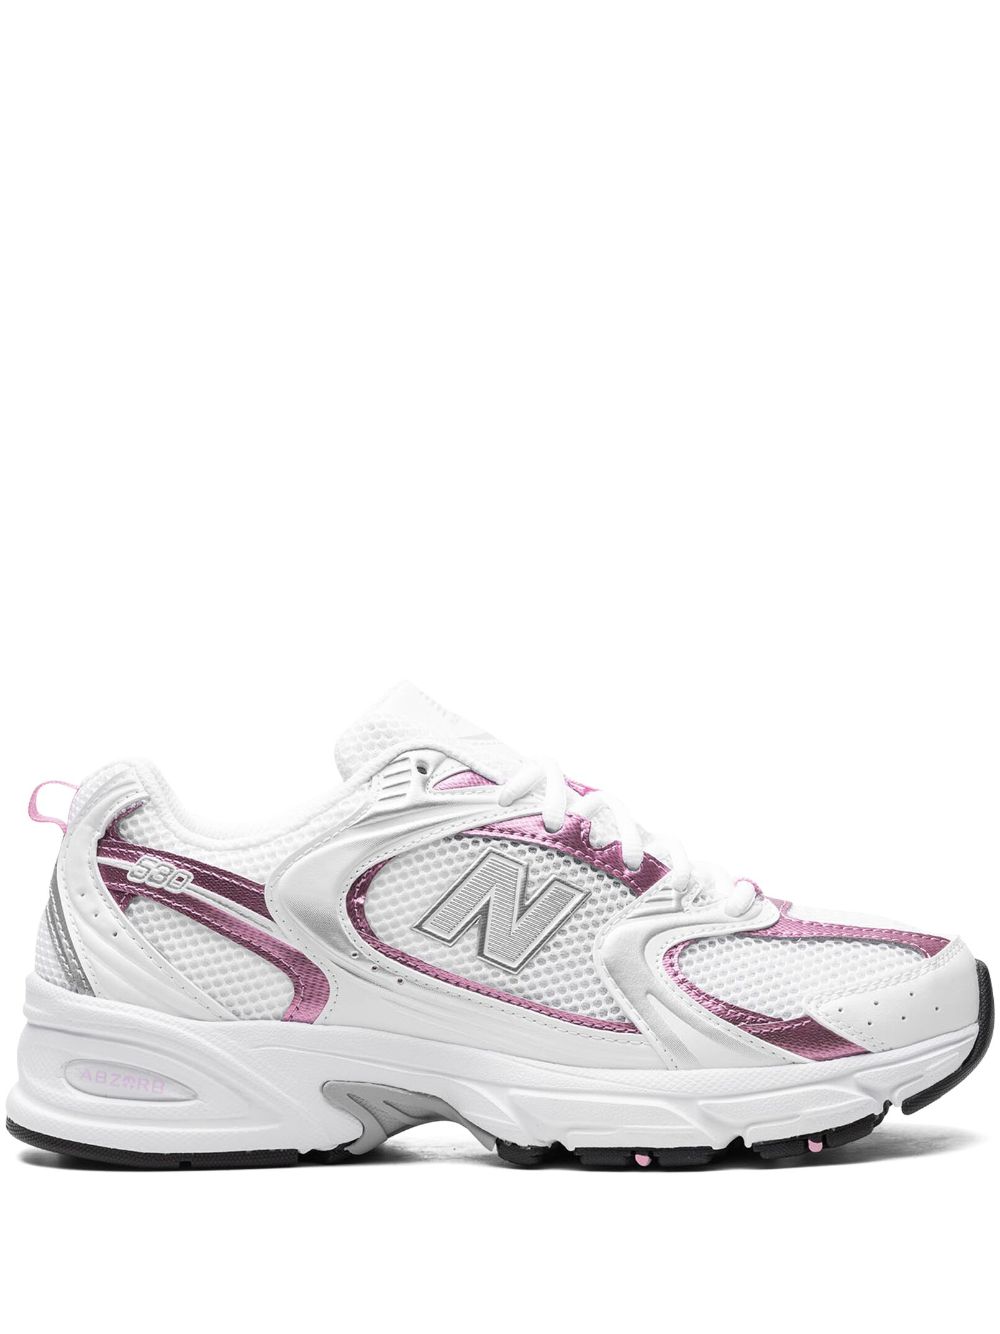 New Balance 530 Mesh Sneakers In White